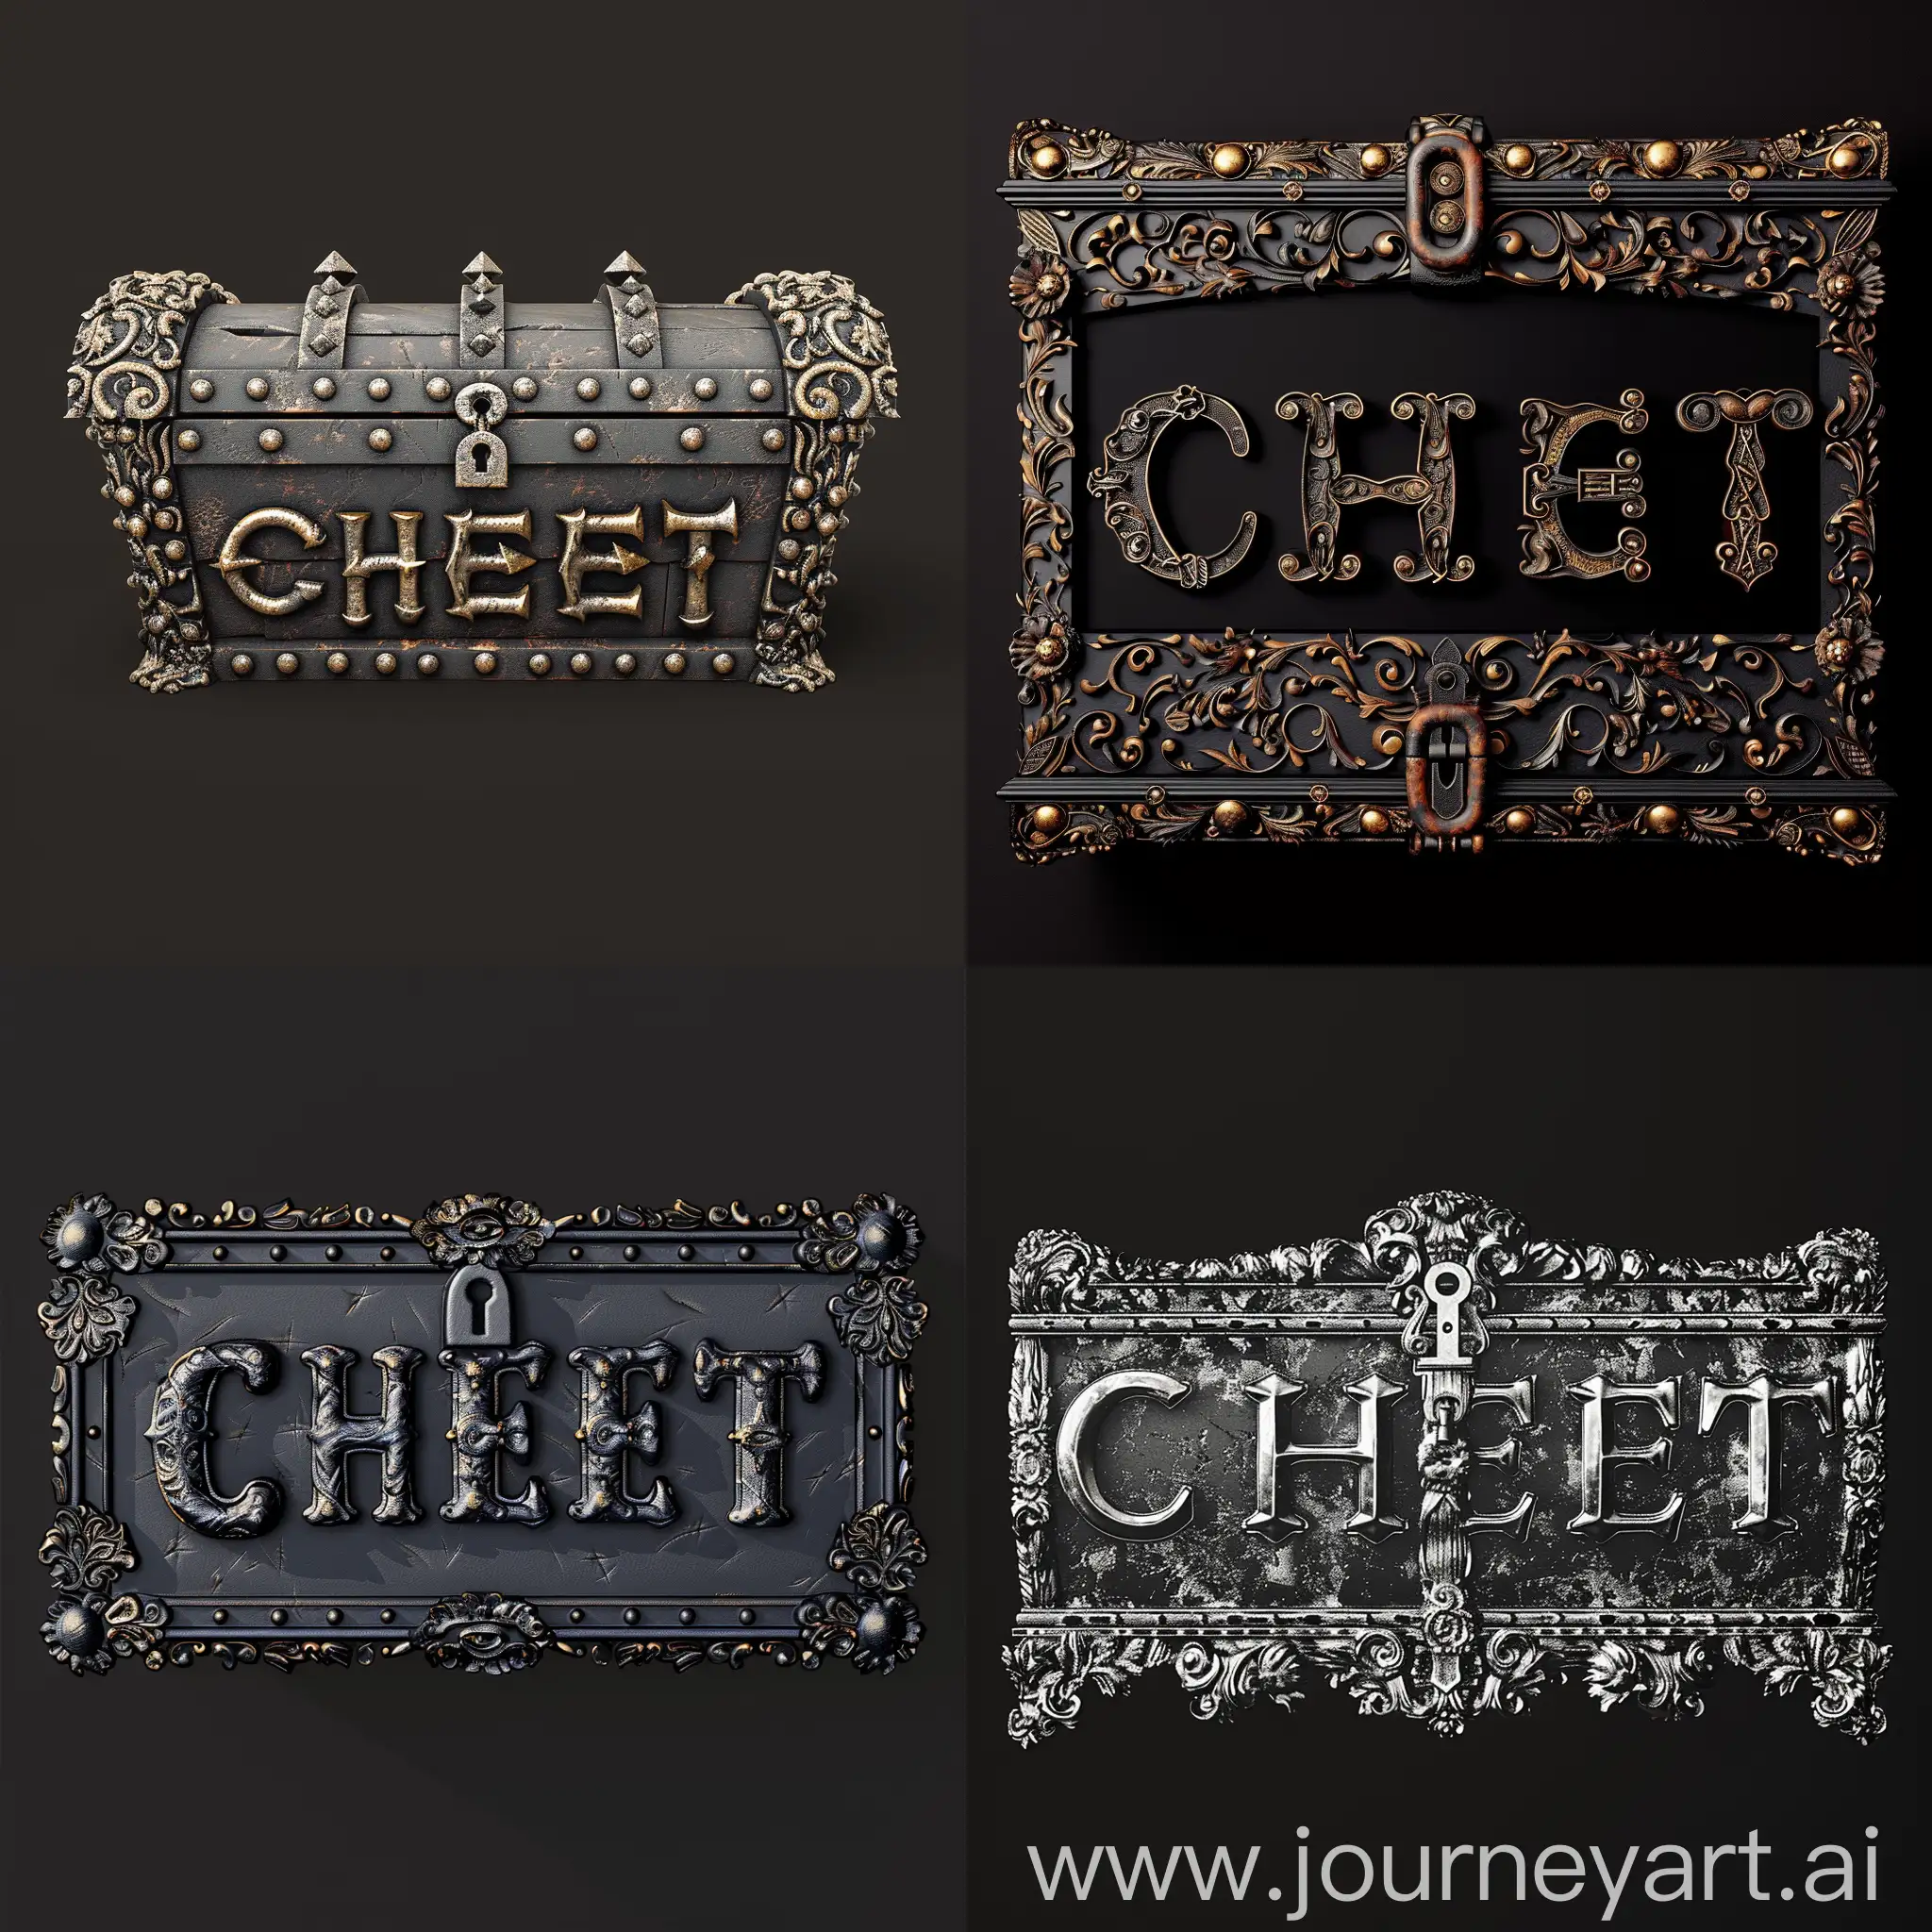 Minimalism::1.2, "CHEST" logo could be to design the word in the form of a treasure chest, the letters could be stylized to resemble the shape of a chest complete with a curved lid lock and decorative details, this could create an interesting and unique visual representation of the word while also tying in with the concept of treasure and valuable contents. --s 150